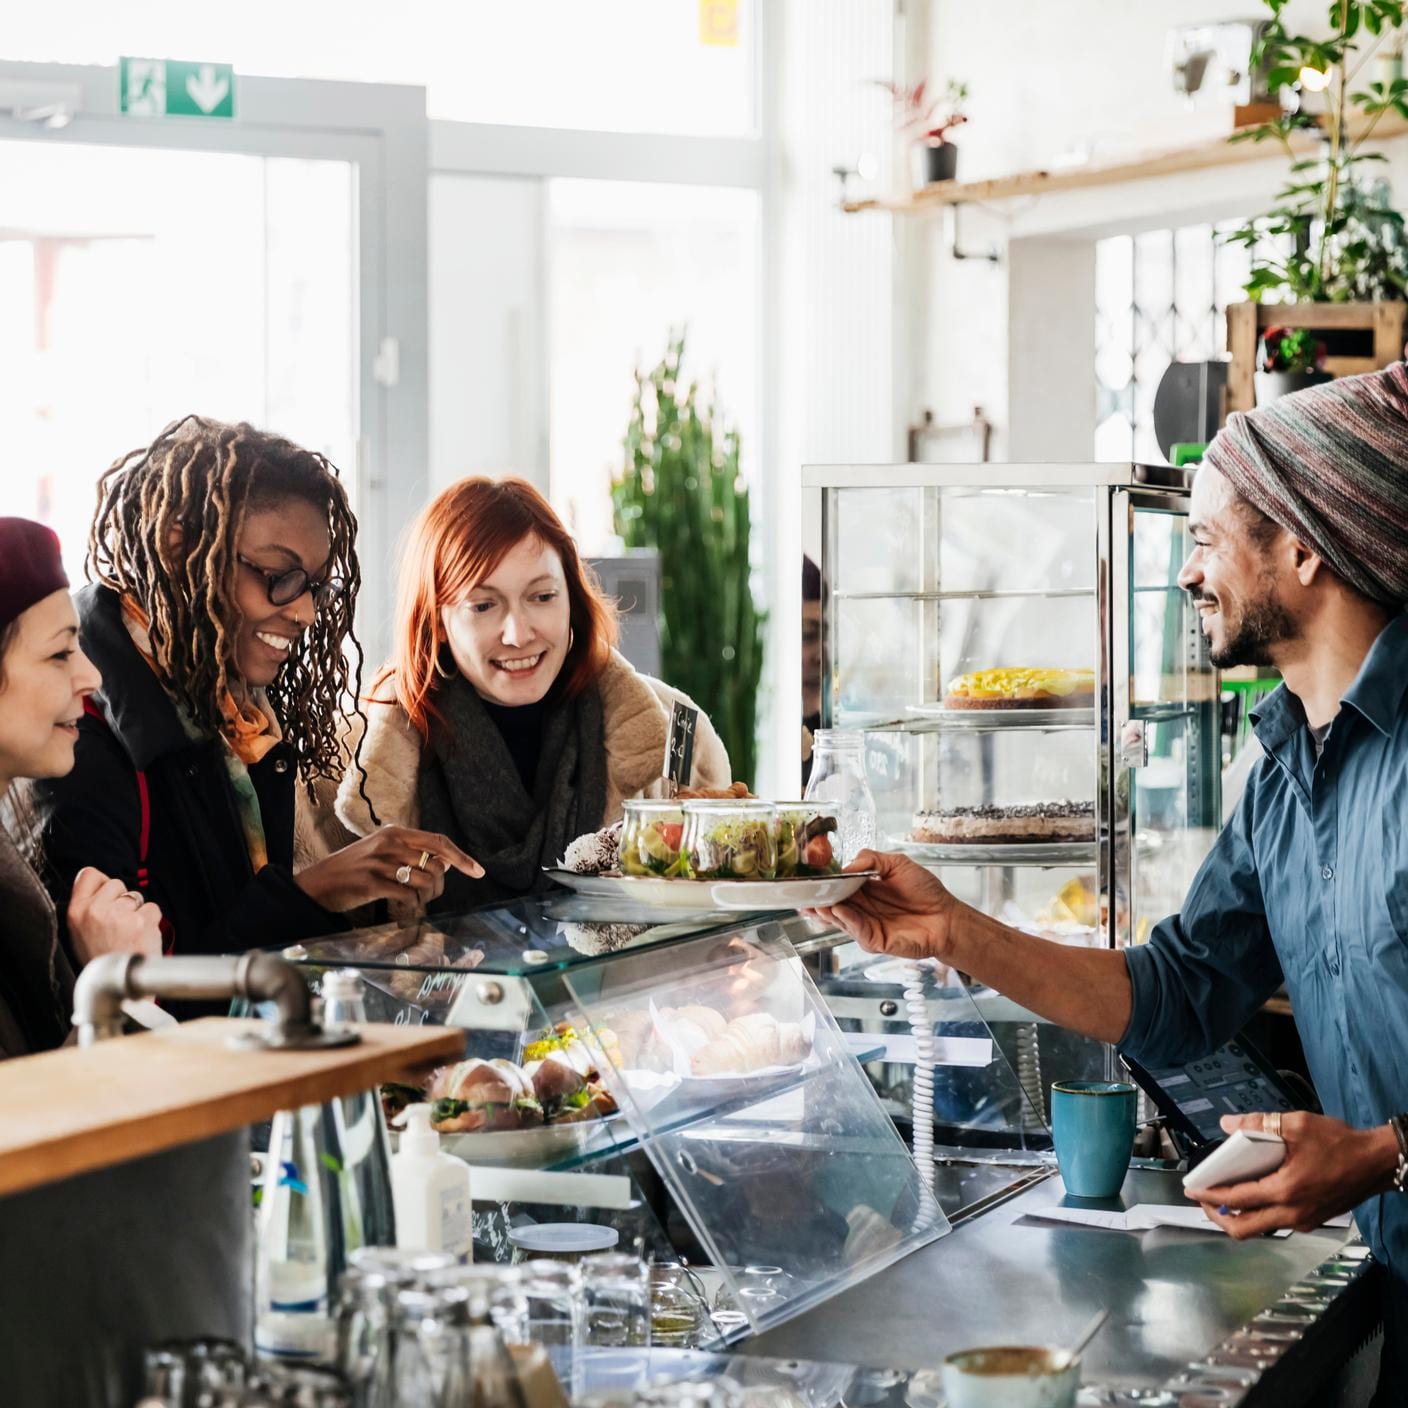 Food safety - A waiter serving three women ordering at a vegan cafe counter